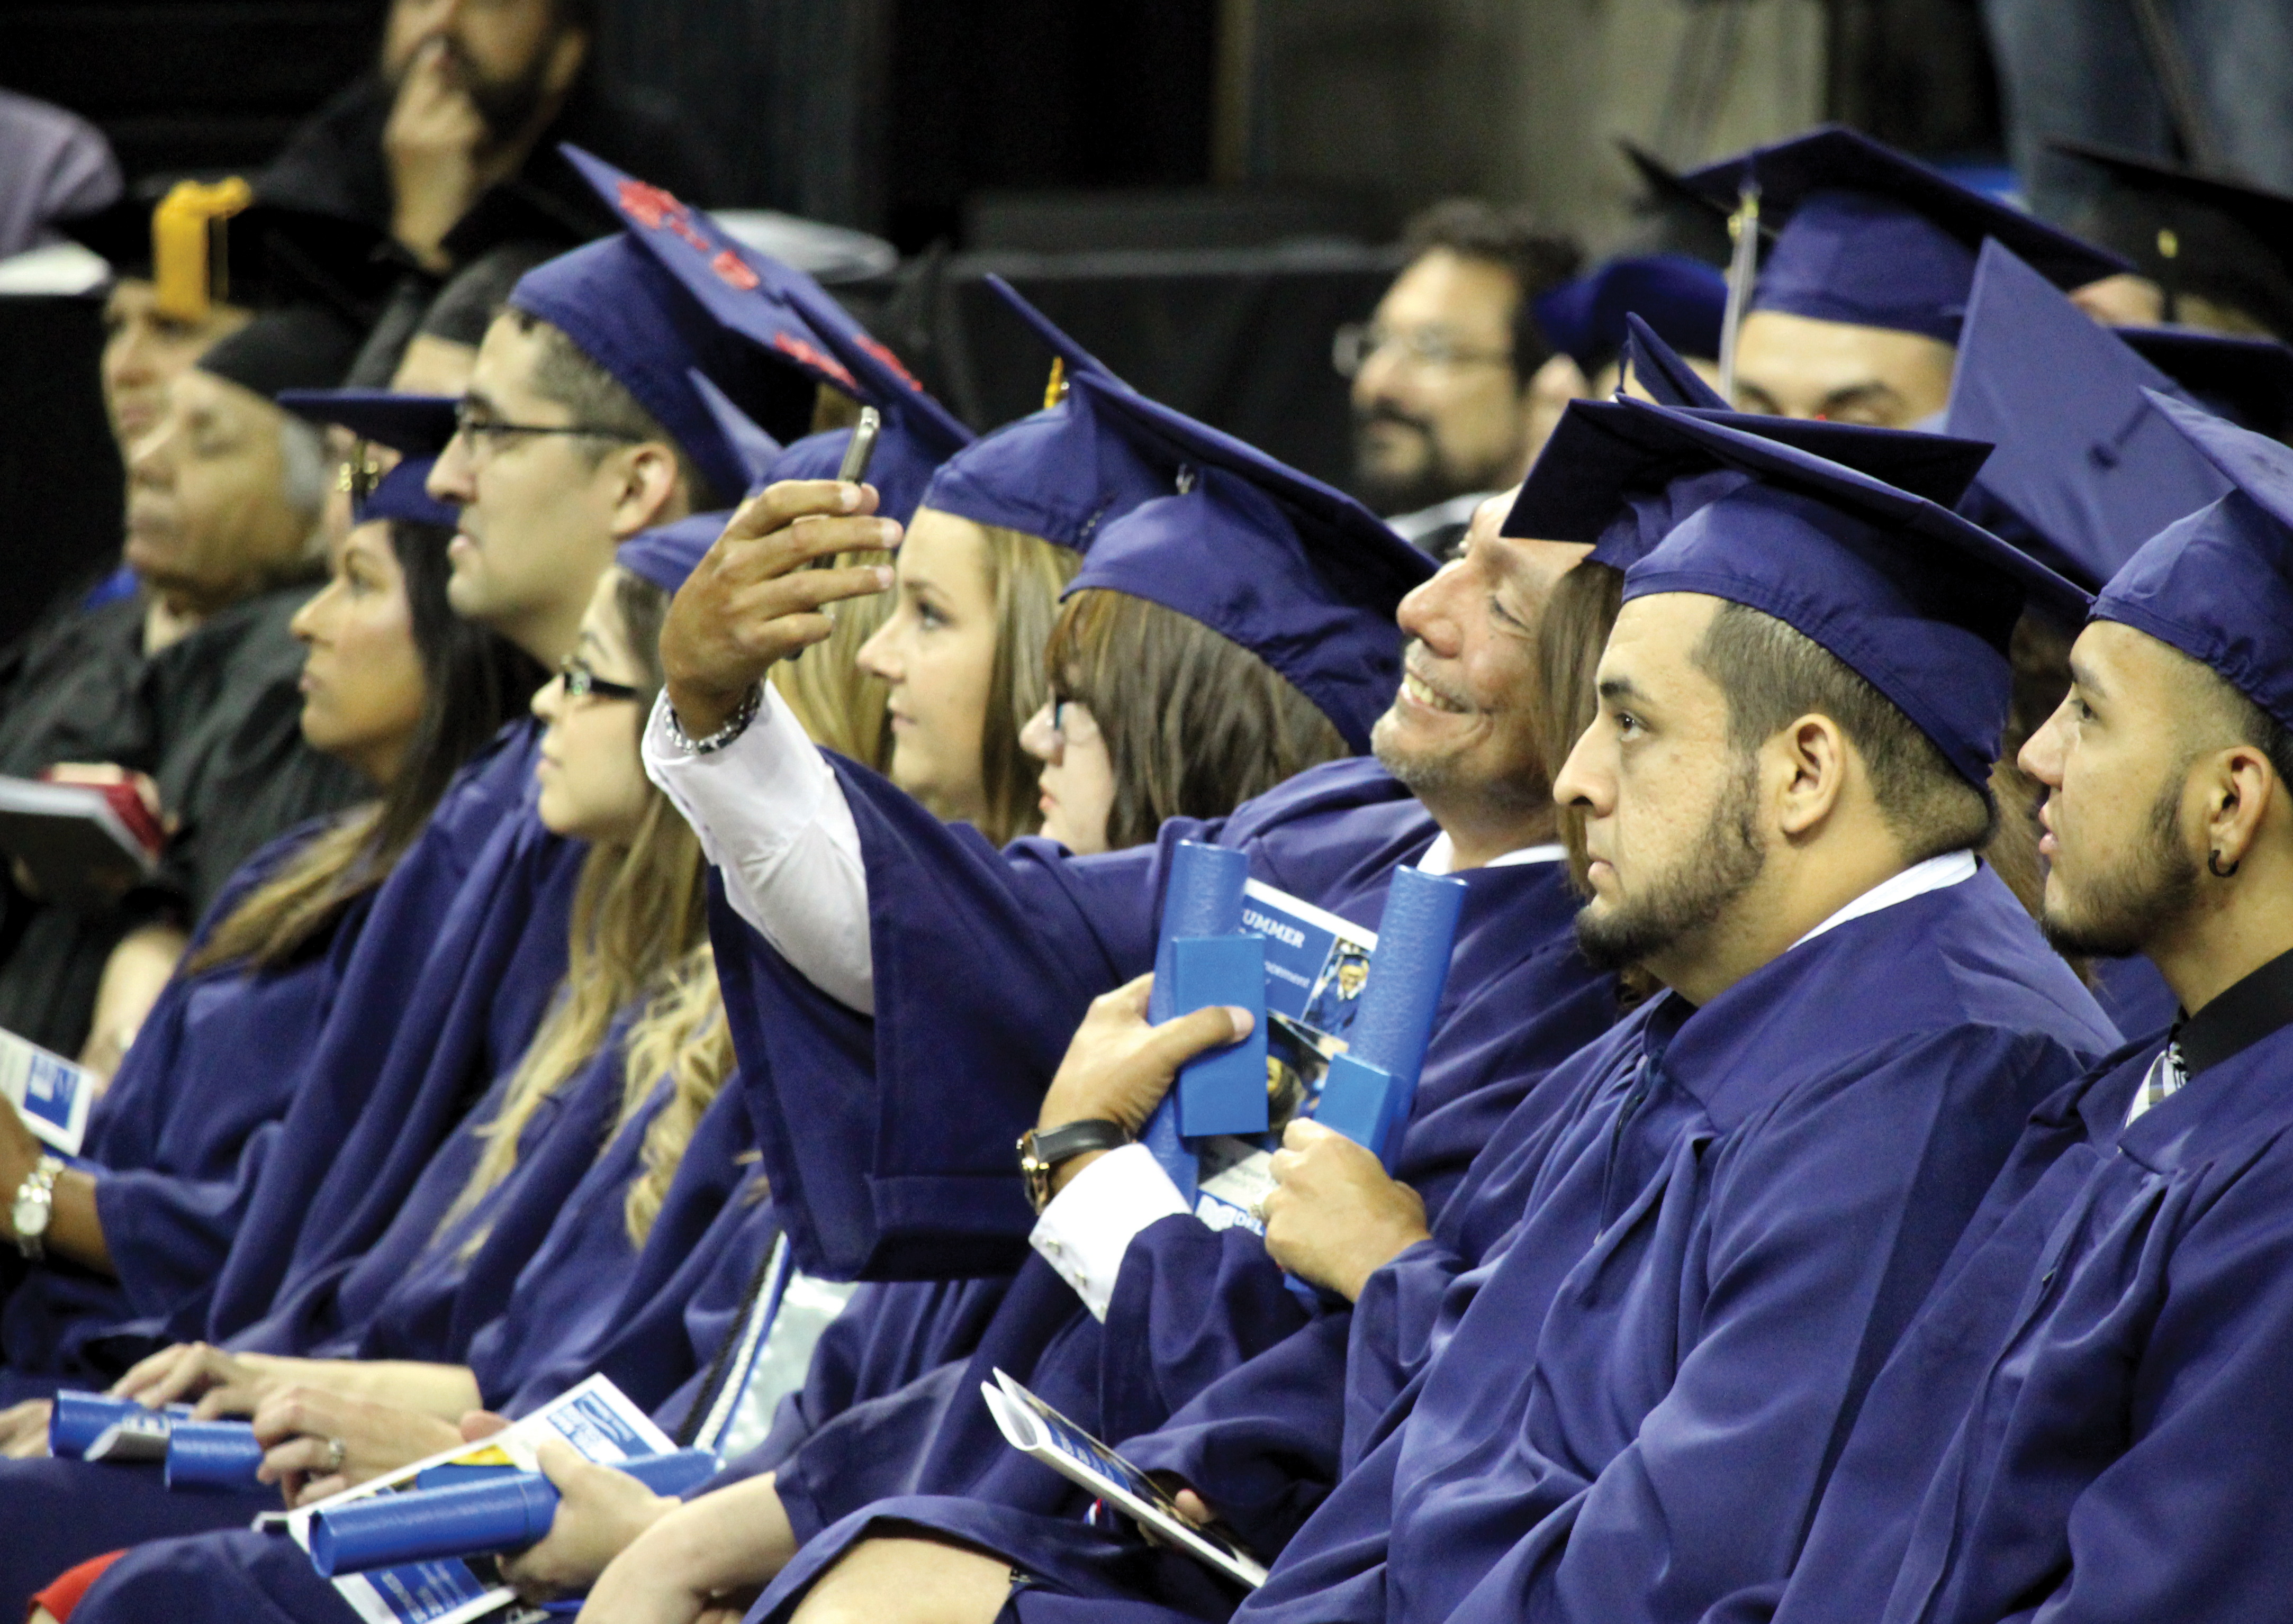 More than 600 expected to graduate